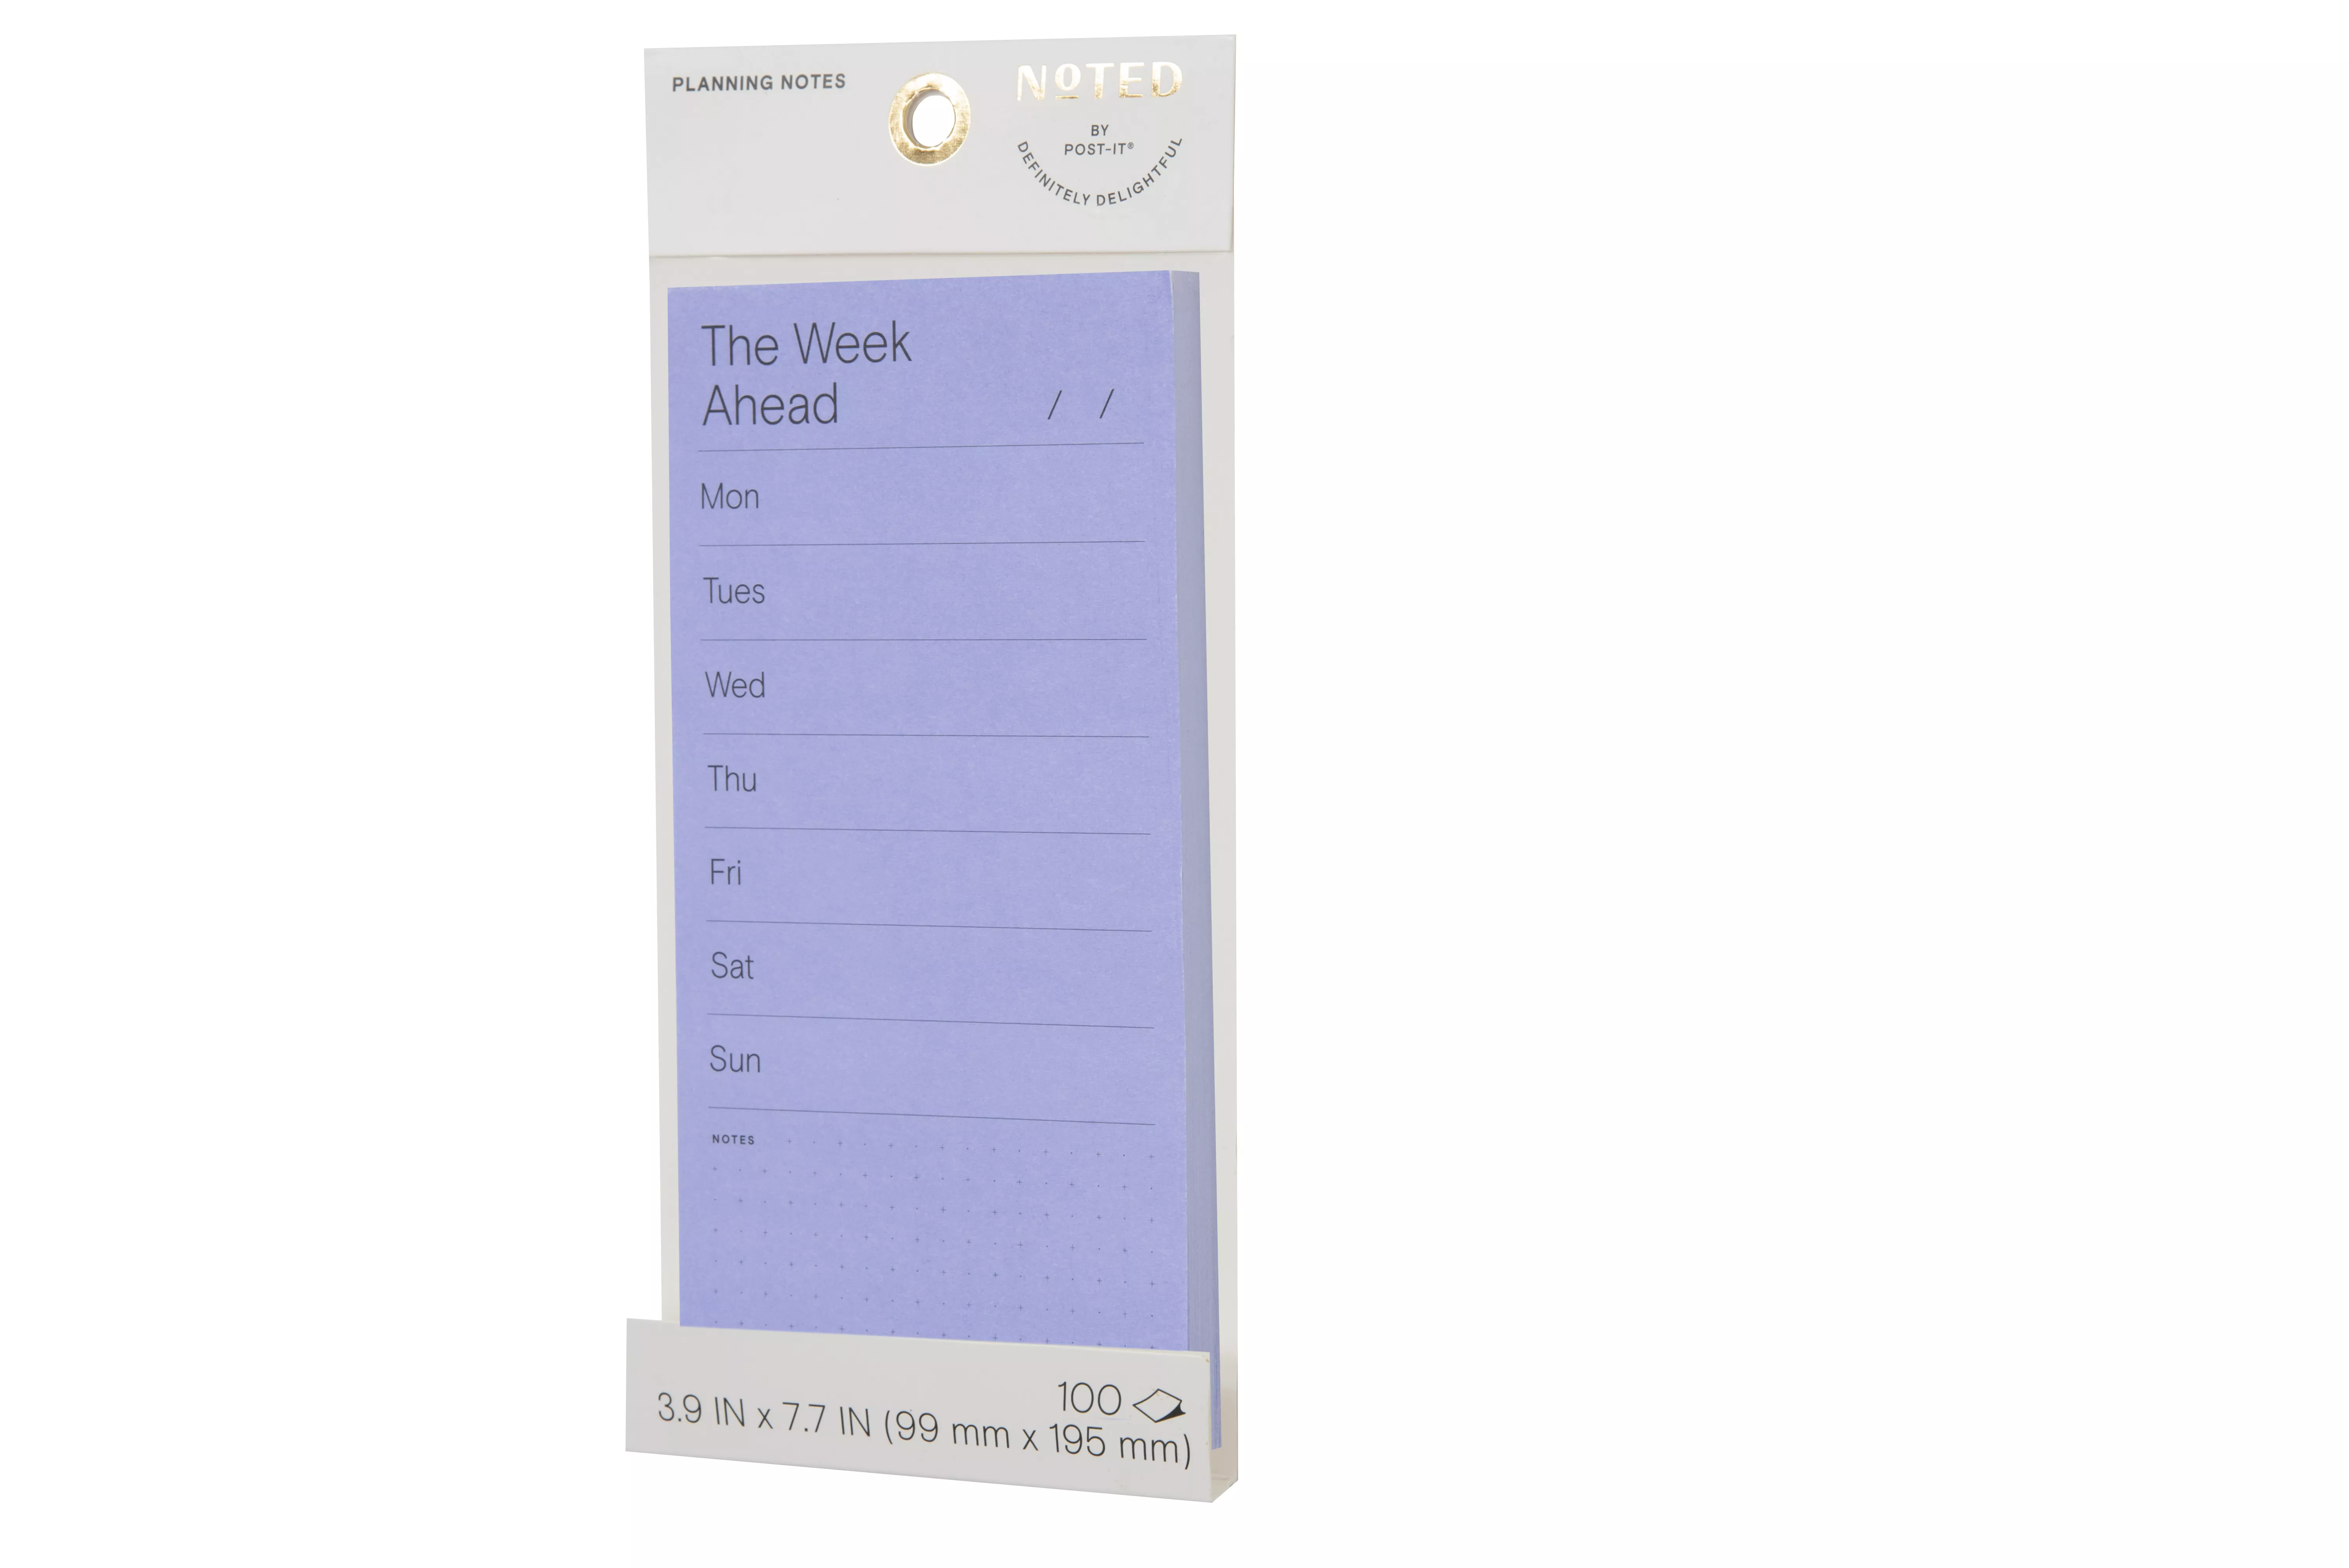 Product Number NTD6-48-3 | Post-it® Planning Notes NTD6-48-3